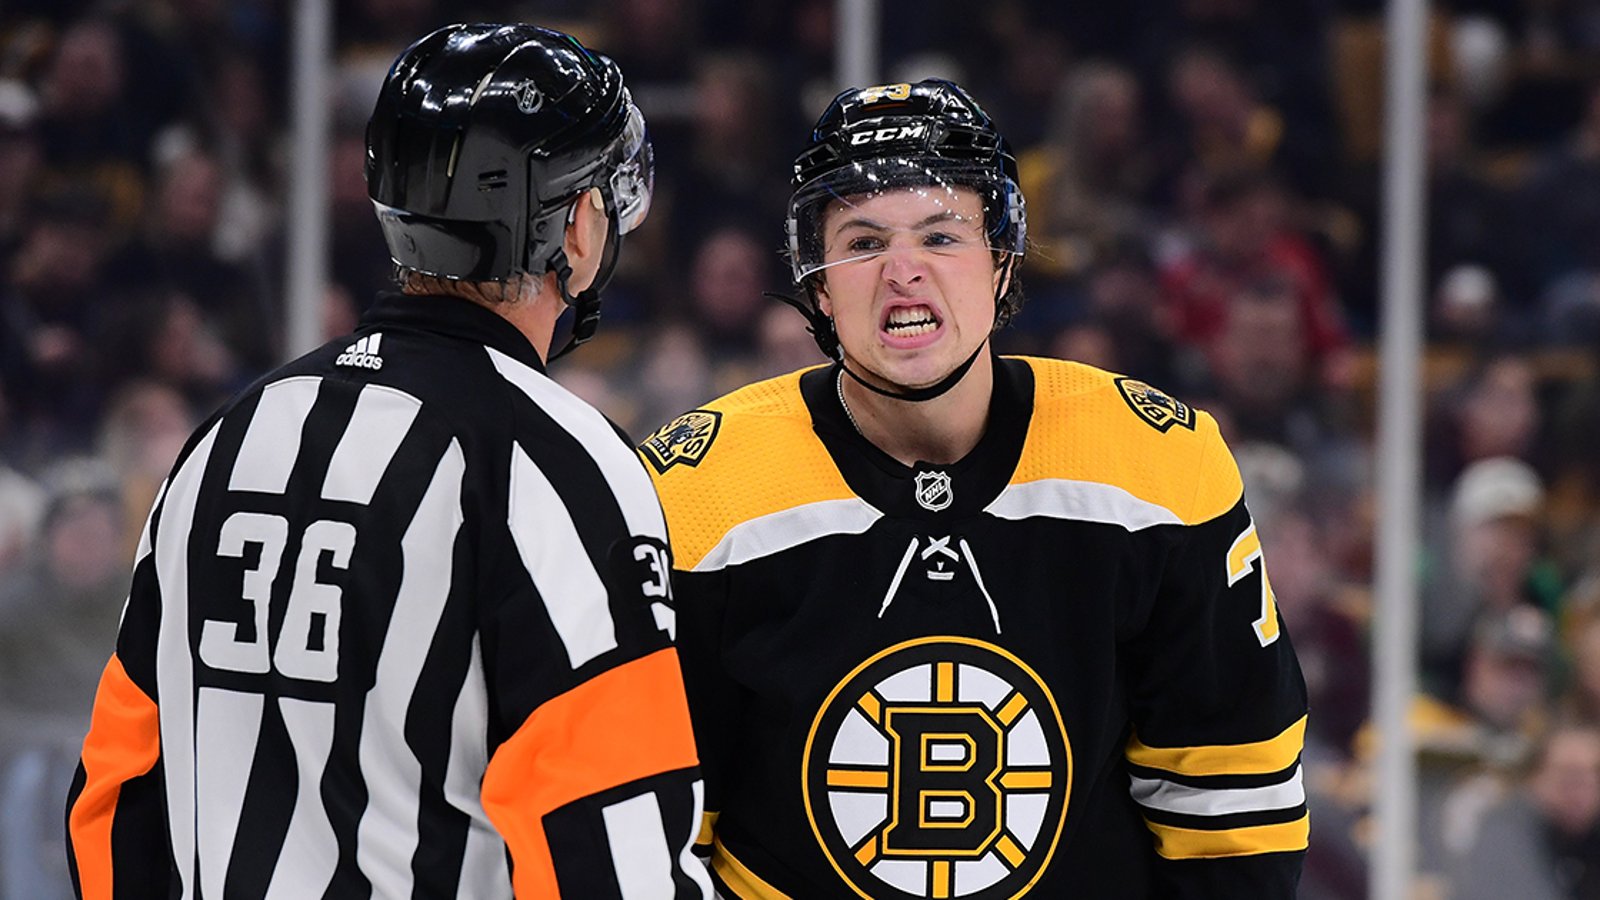 More bad news for Bruins and McAvoy